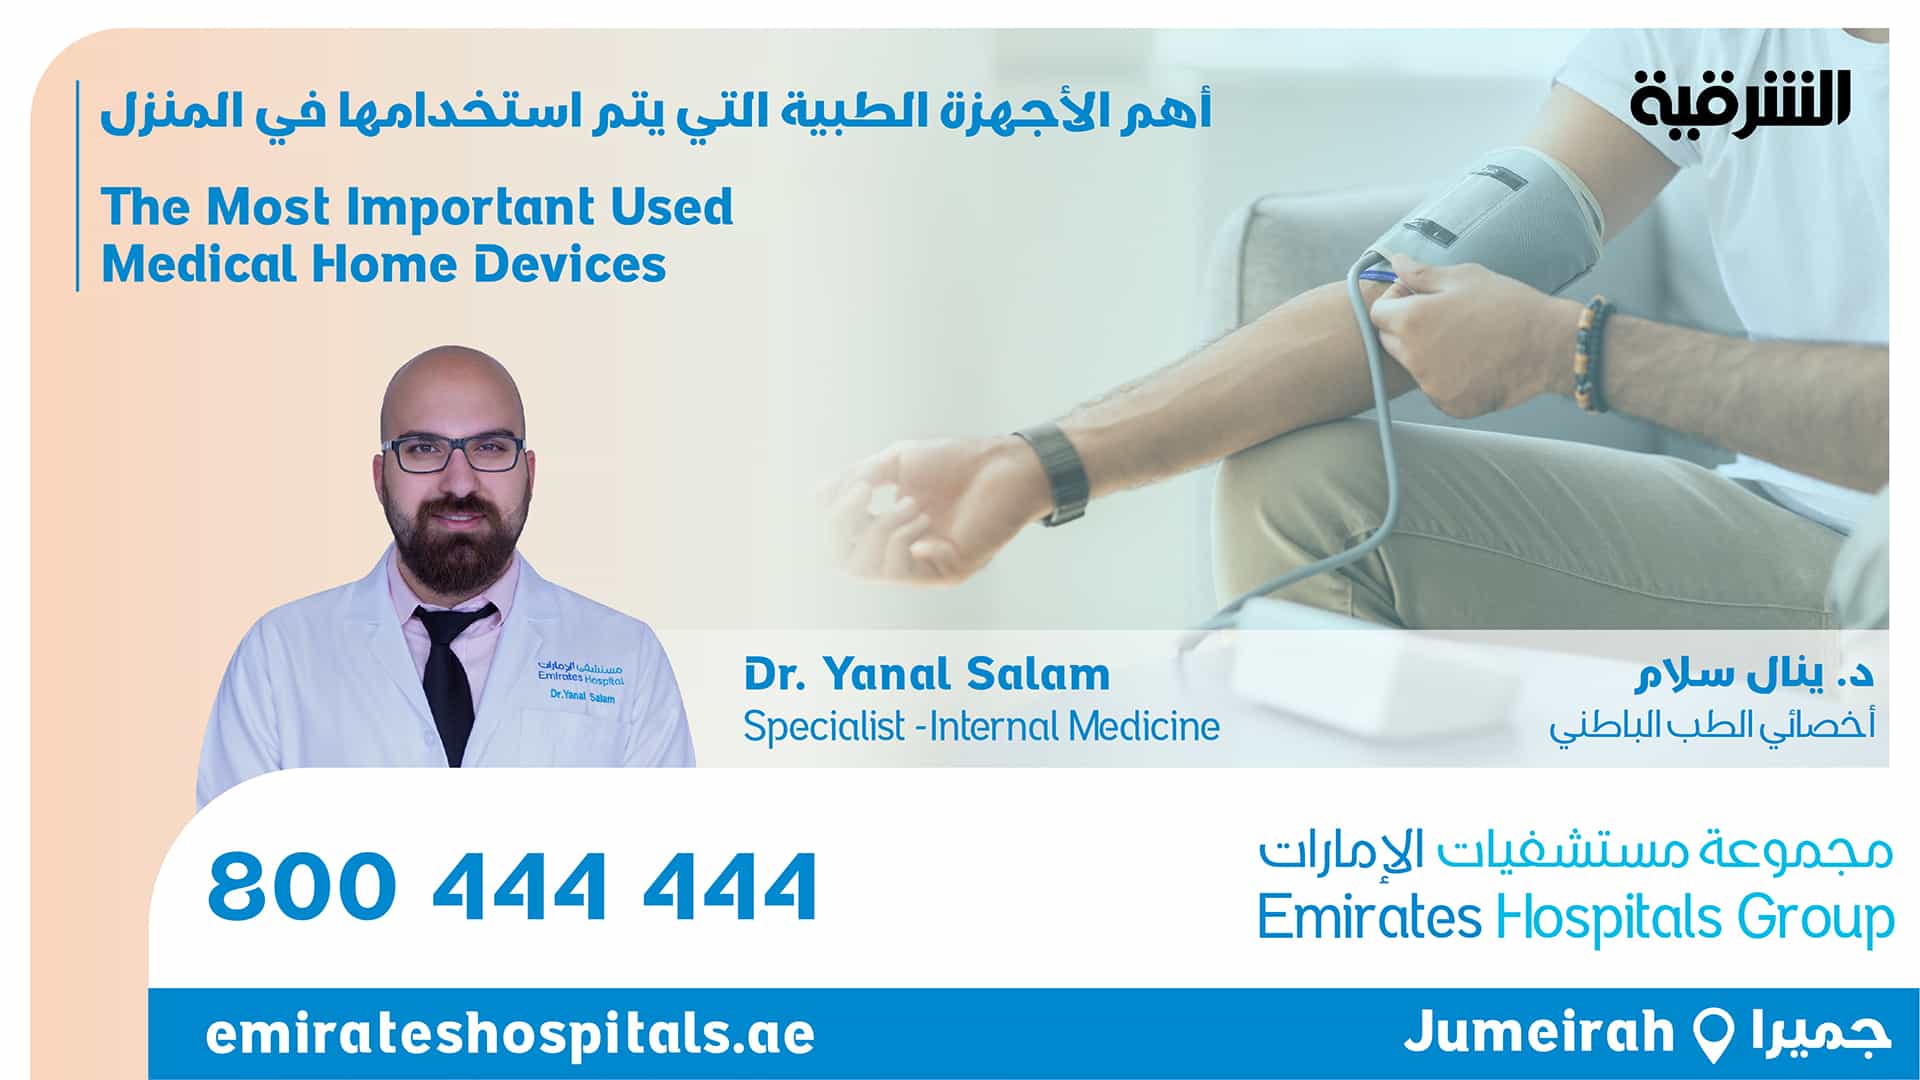 The Most Important used MEdical Home Devices - Dr Yanal Salam , Specialist Internal Medicine